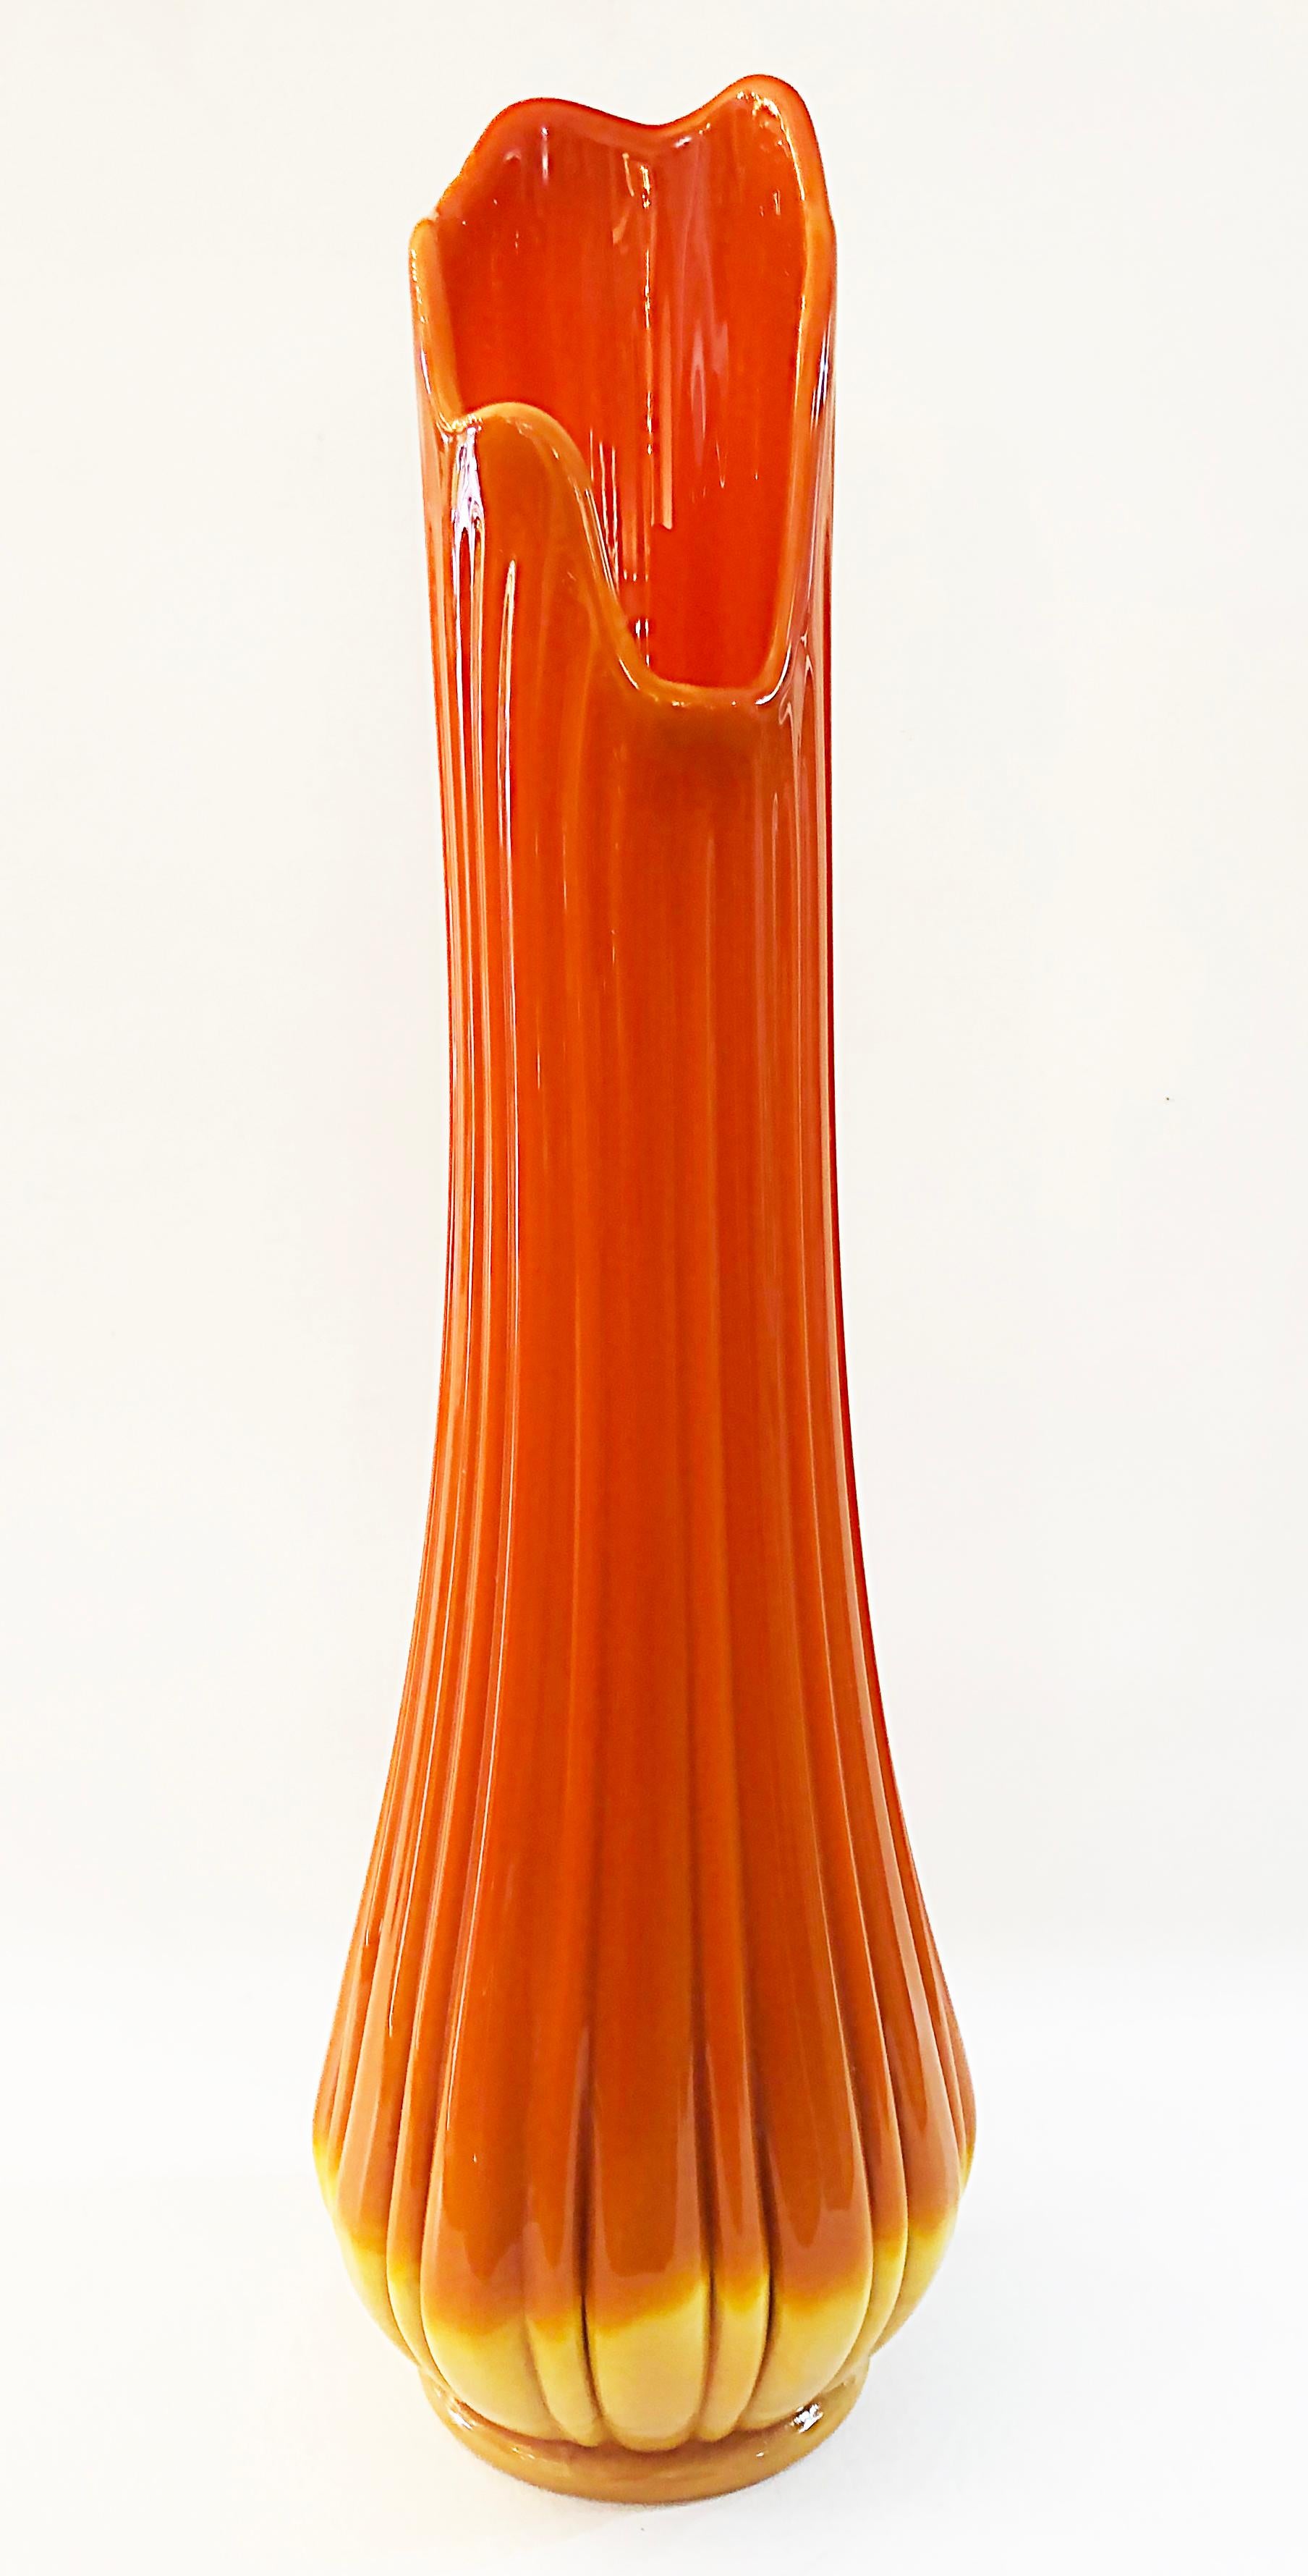 Viking swung orange glass vase attributed to L.E. Smith, 1960s.

Offered for sale is a Mid-Century Modern opaque orange swung glass vase attributed to L. E. Smith. This is an 1960s iconic custard glass vase in bold colors of the period.